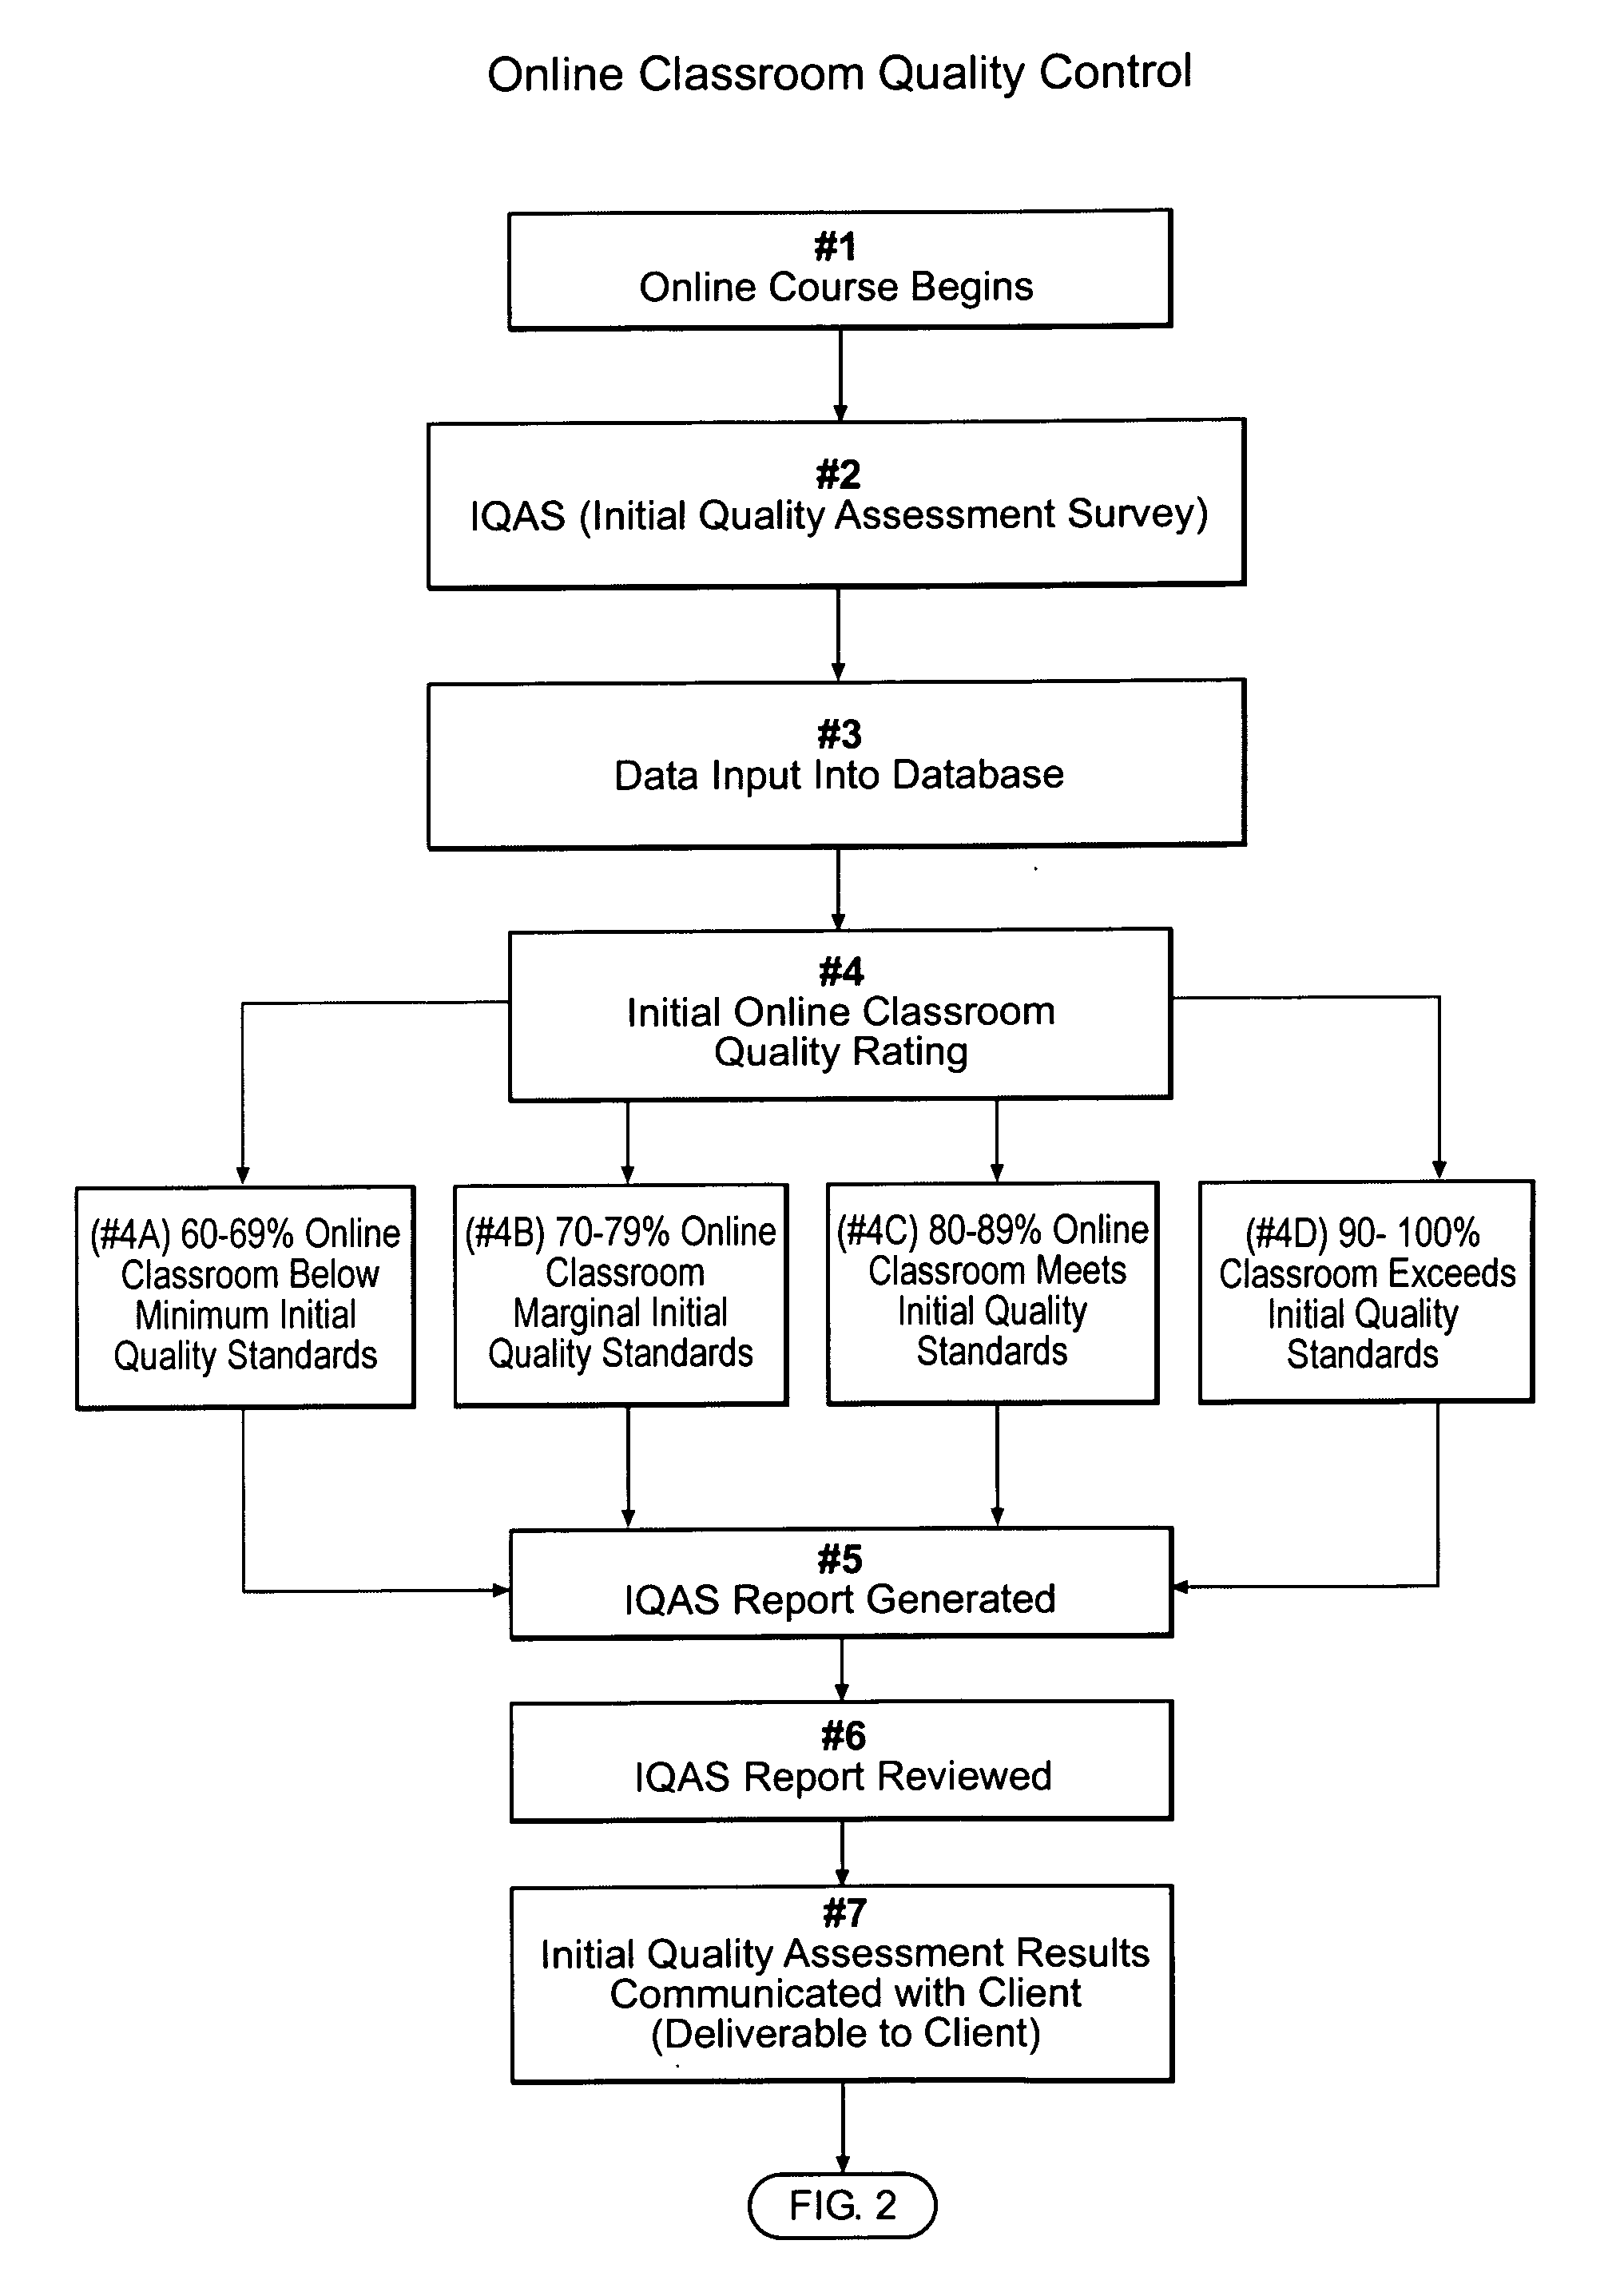 Online classroom quality control system and method